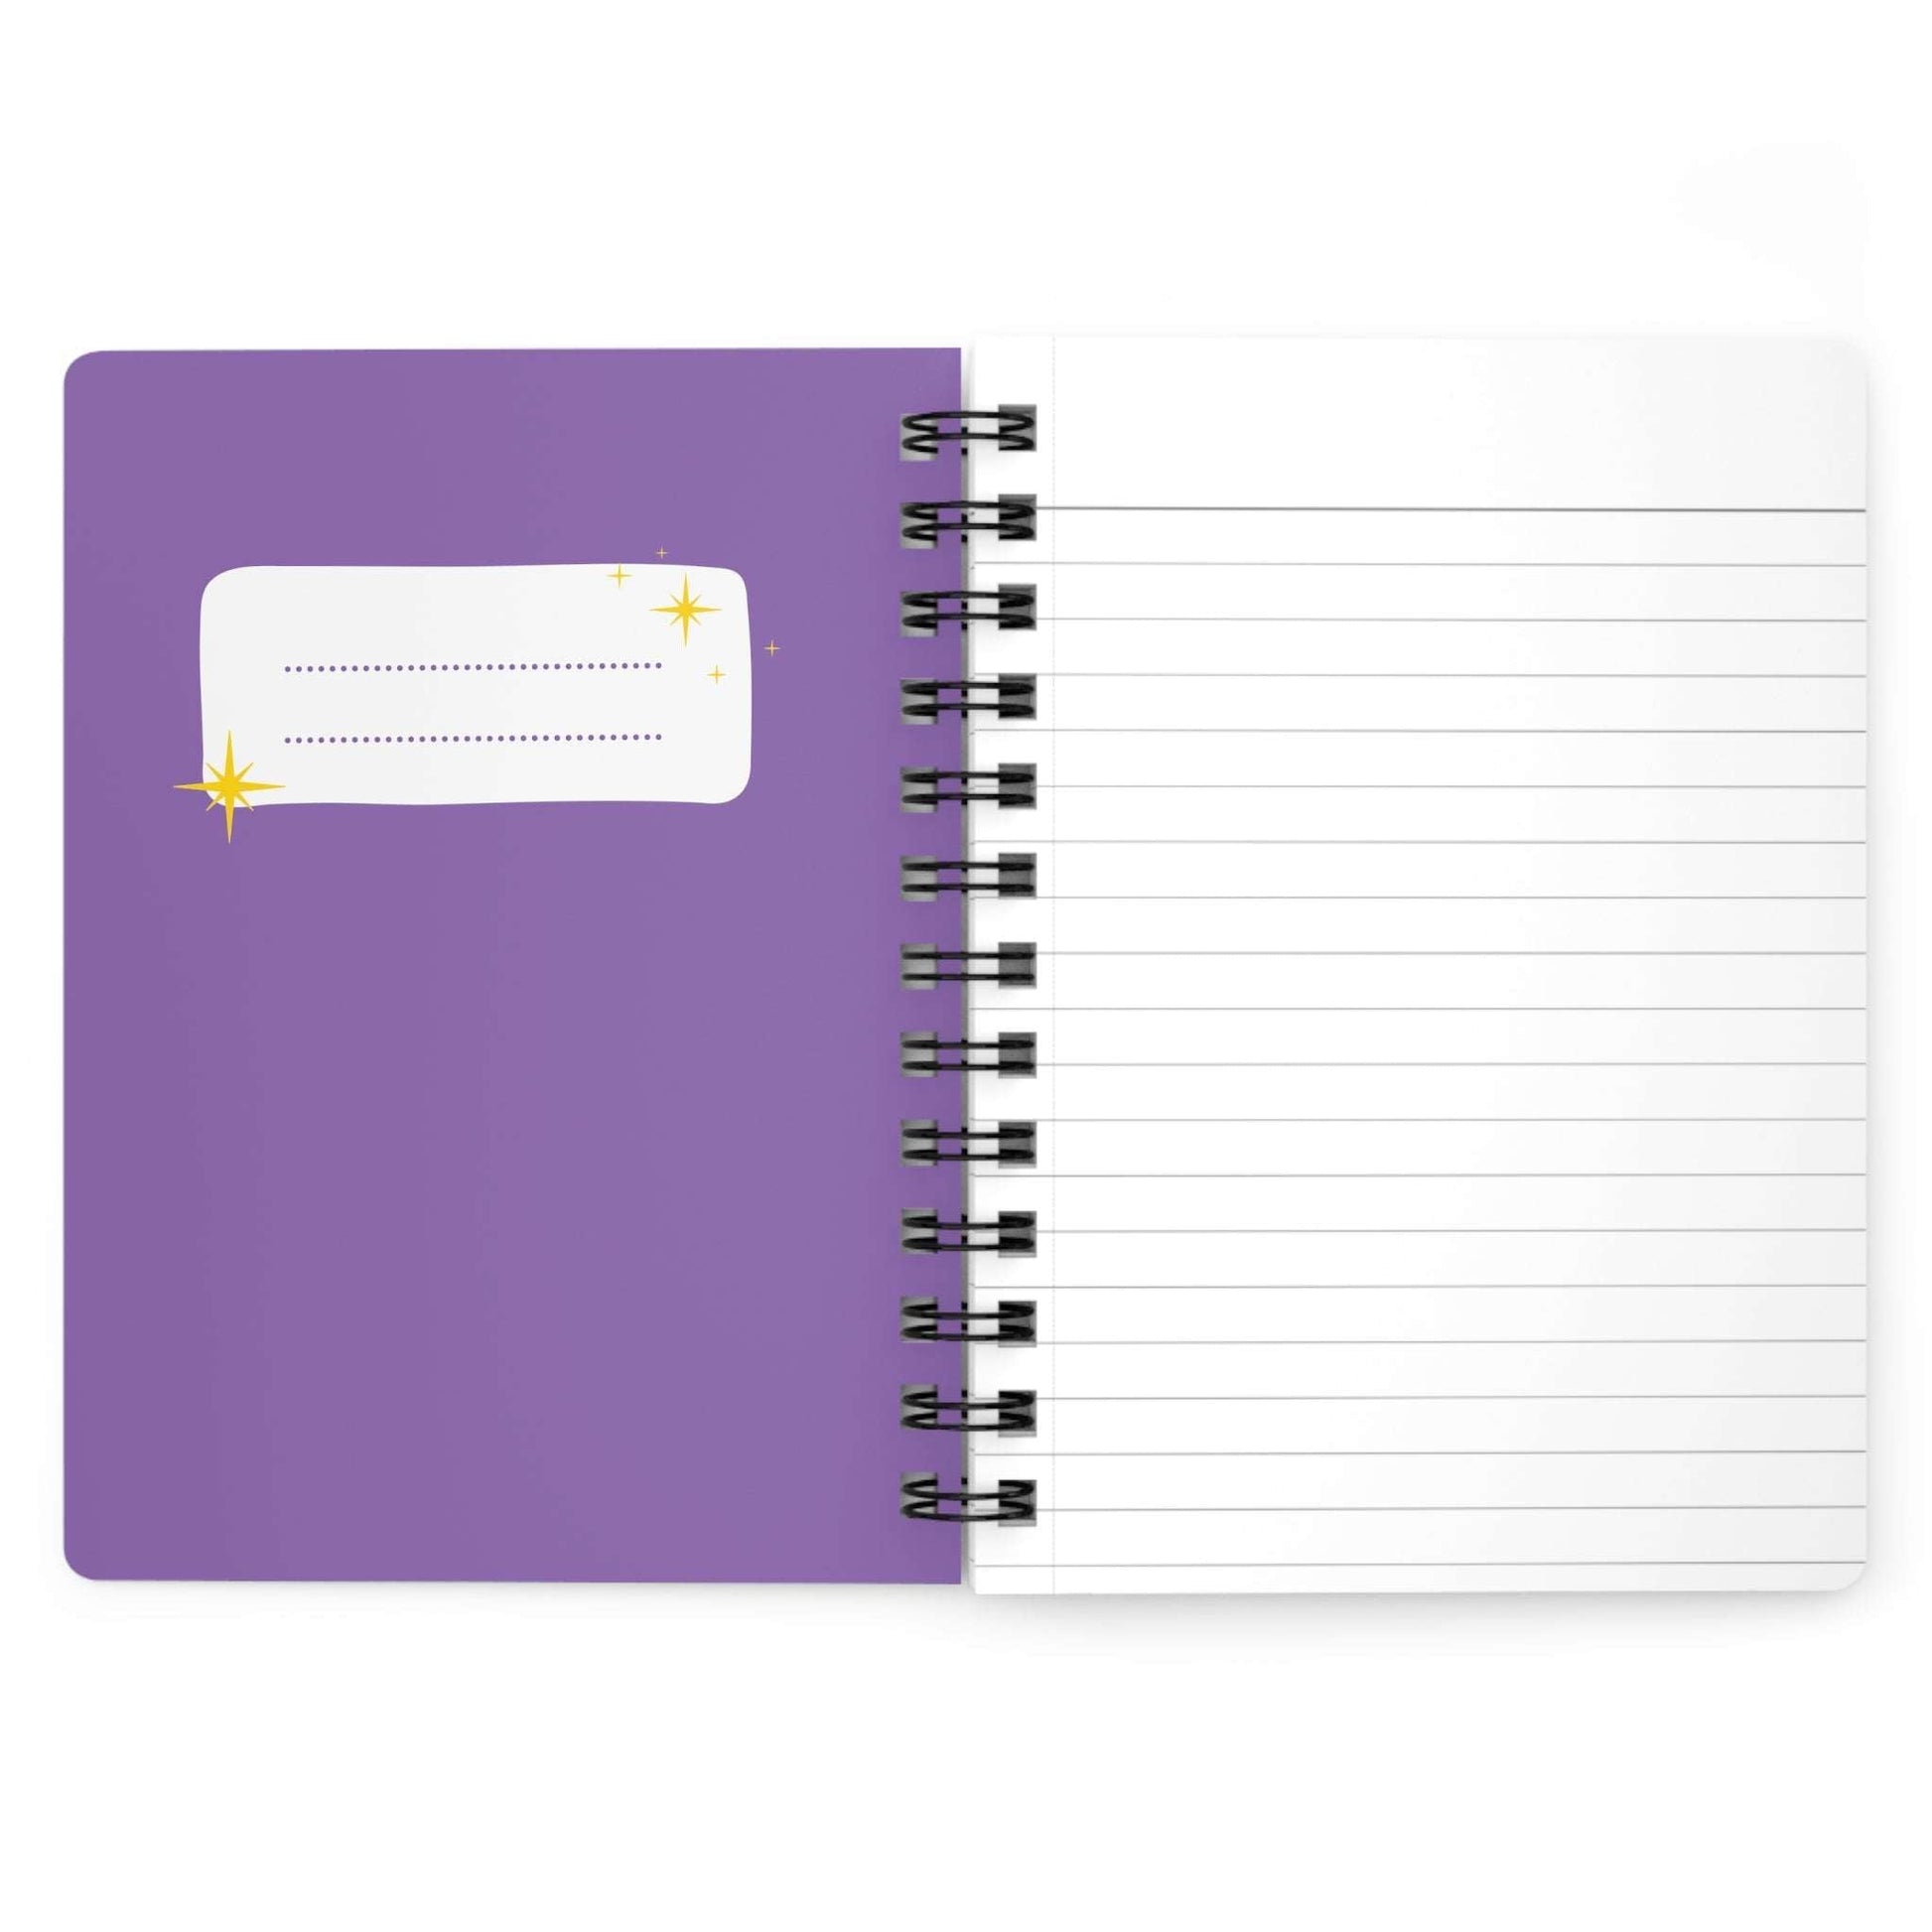 Unicorn Spiral Bound Homeschool JournalWolfe Paw DesignsUnicorn Spiral Bound Homeschool JournalPurple - Unicorn Homeschool lined journal 
Your homeschooler can now write in style with our themed lined journals made for kids just like yours!
Each color has its Unicorn Spiral Bound Homeschool Journal